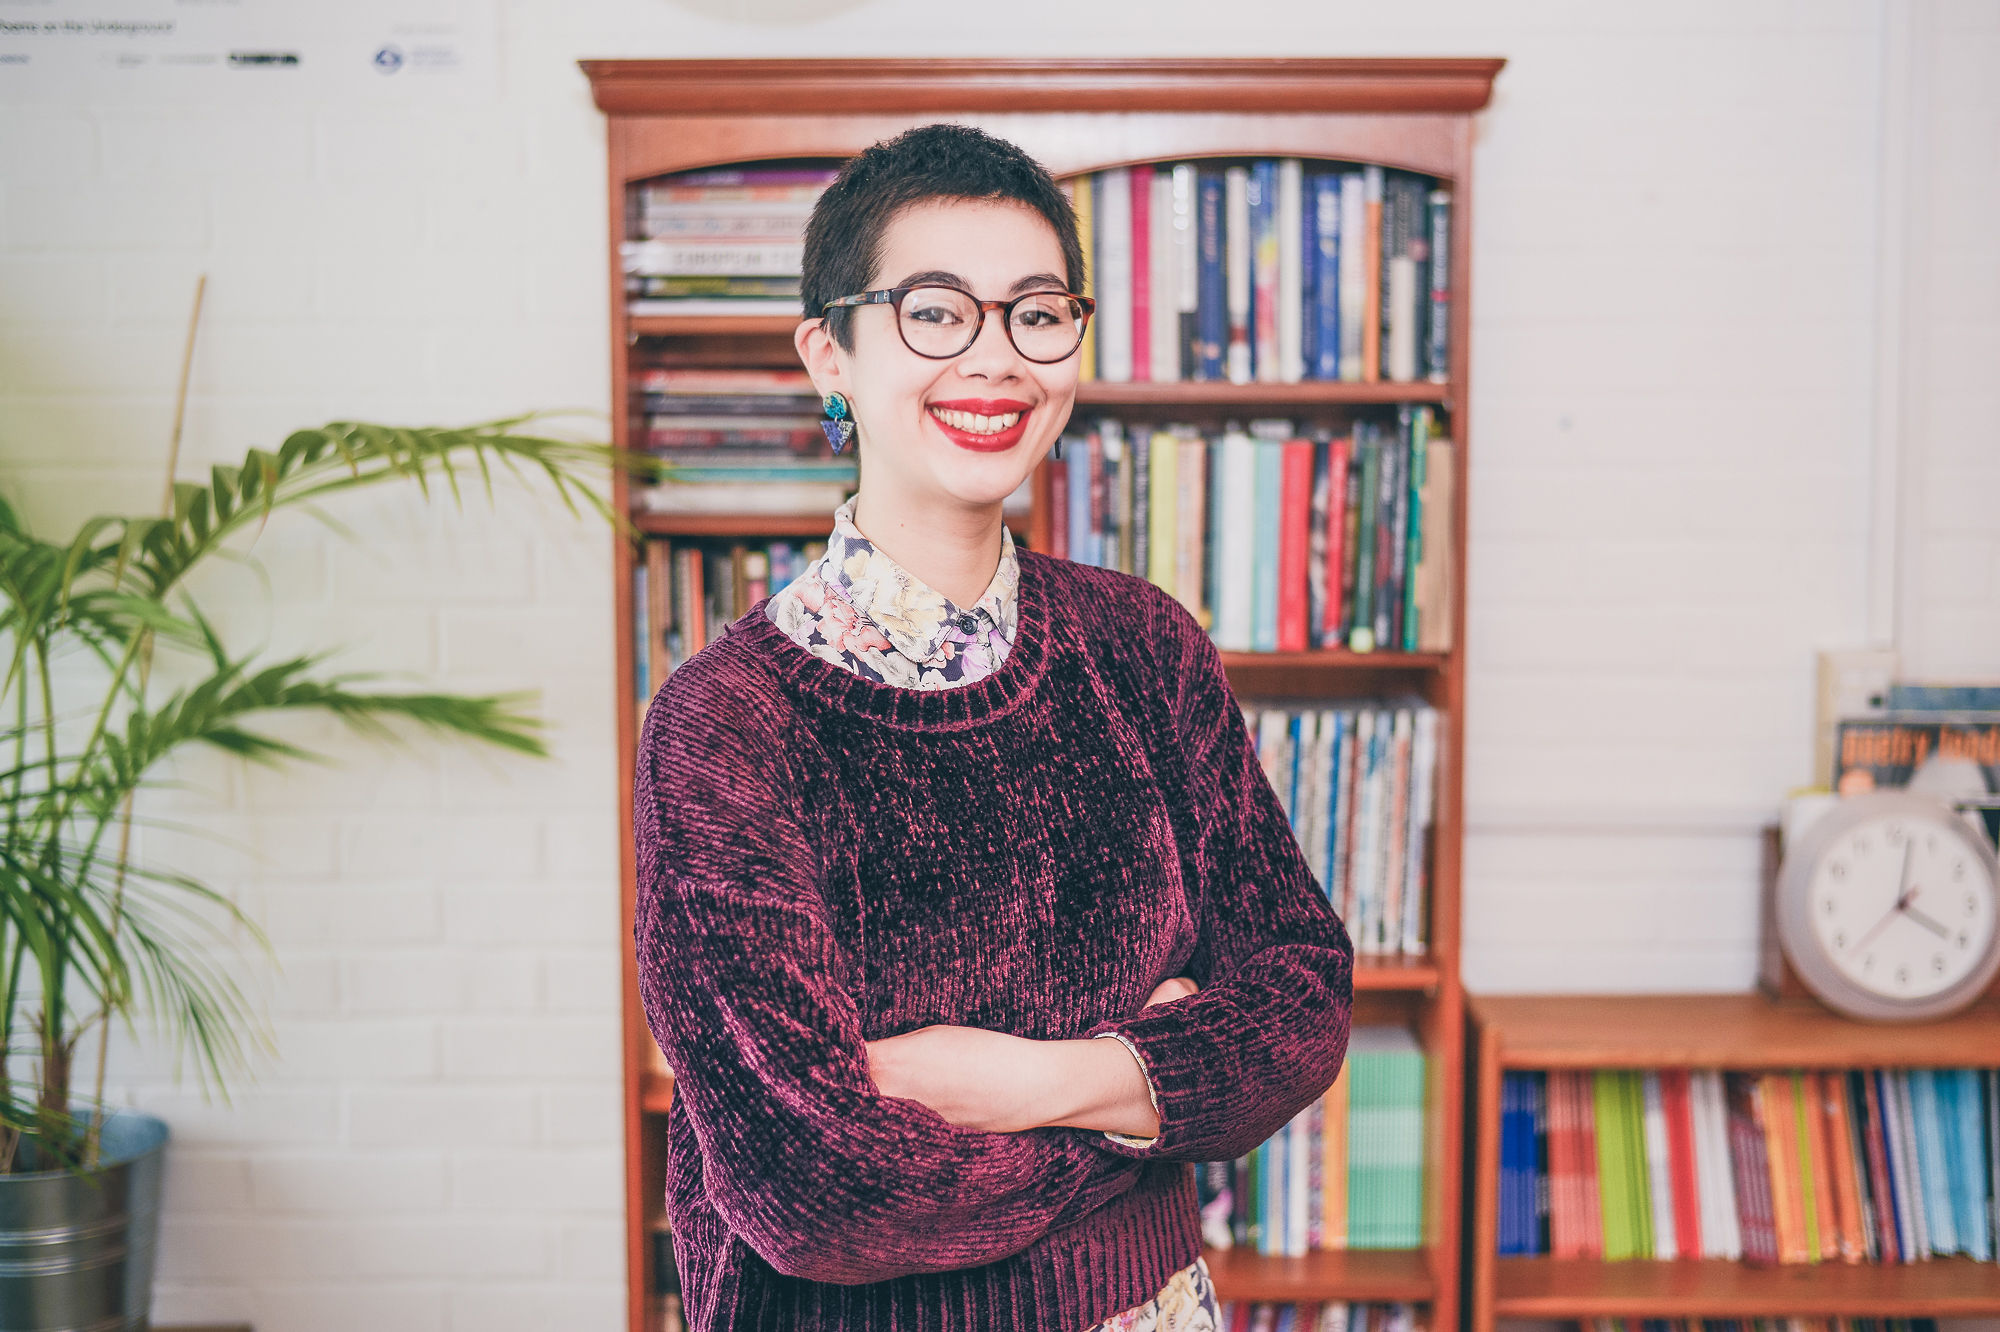 a person with short hair, glasses and red lipstick smiling in front of a bookcase